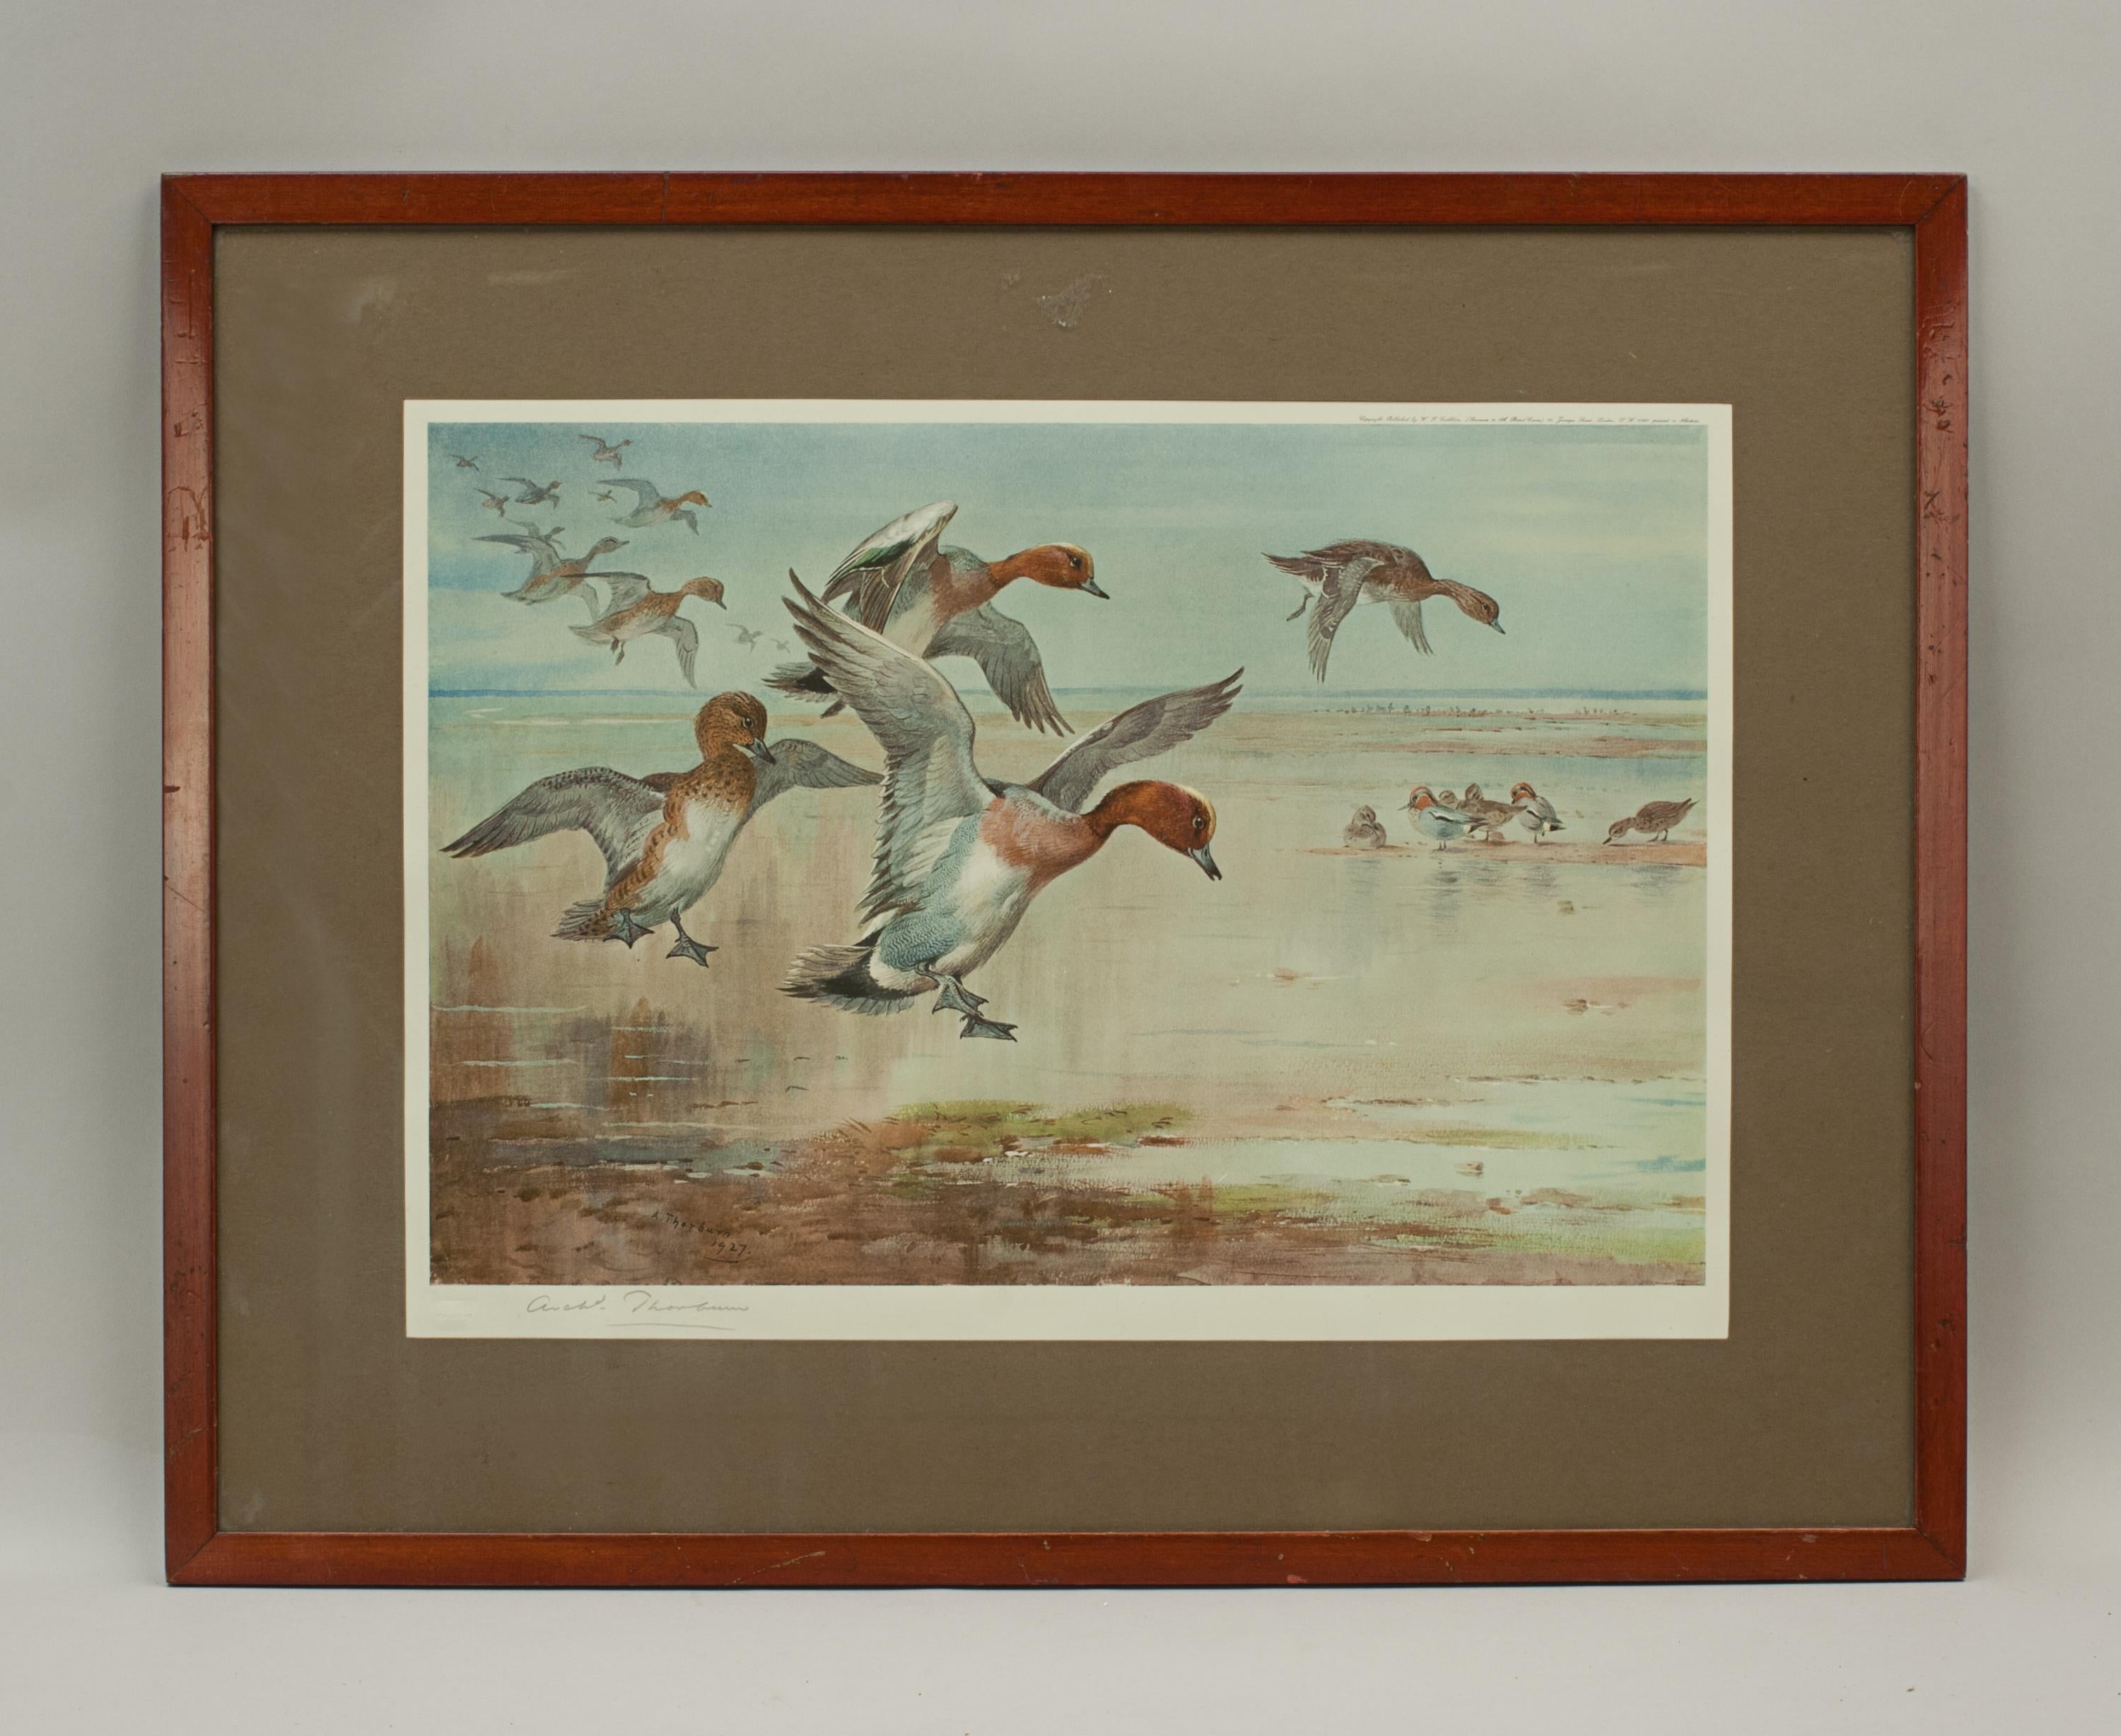 Signed wildfowl print by Archibald Thorburn.
A framed wildfowl collotype print by Archibald Thorburn titled 'Widgeon Alighting', signed in pencil by the artist and with Fine Art Trade Guild blind stamp. Copyright Published 1927 by W.F. Embleton